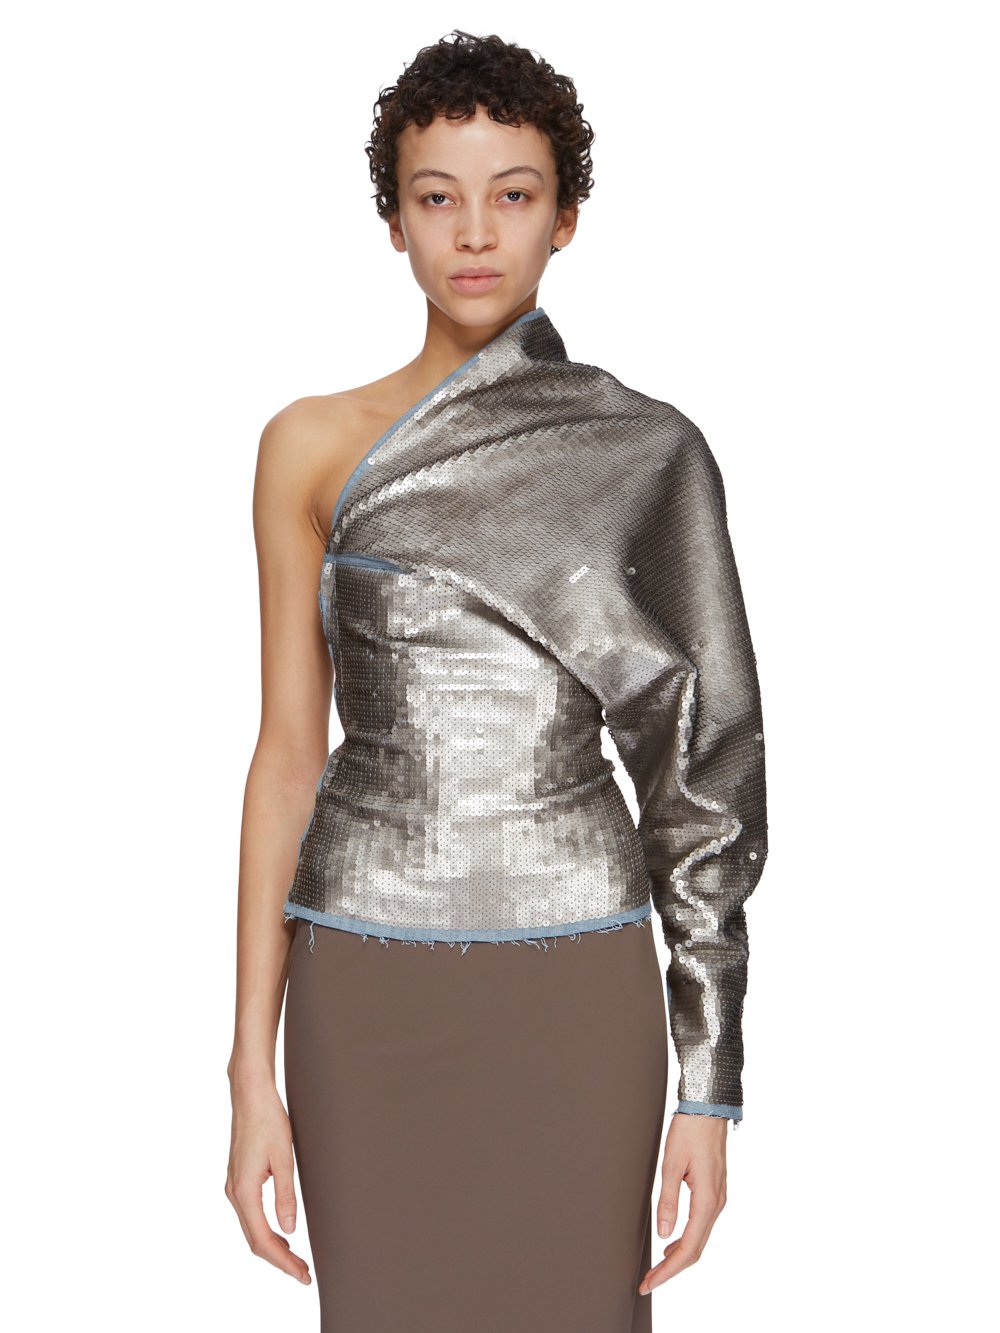 RICK OWENS FW23 LUXOR RUNWAY ONE SLEEVE TOP IN BLUE AND PEARL SEQUIN EMBROIDERED STRETCH DENIM